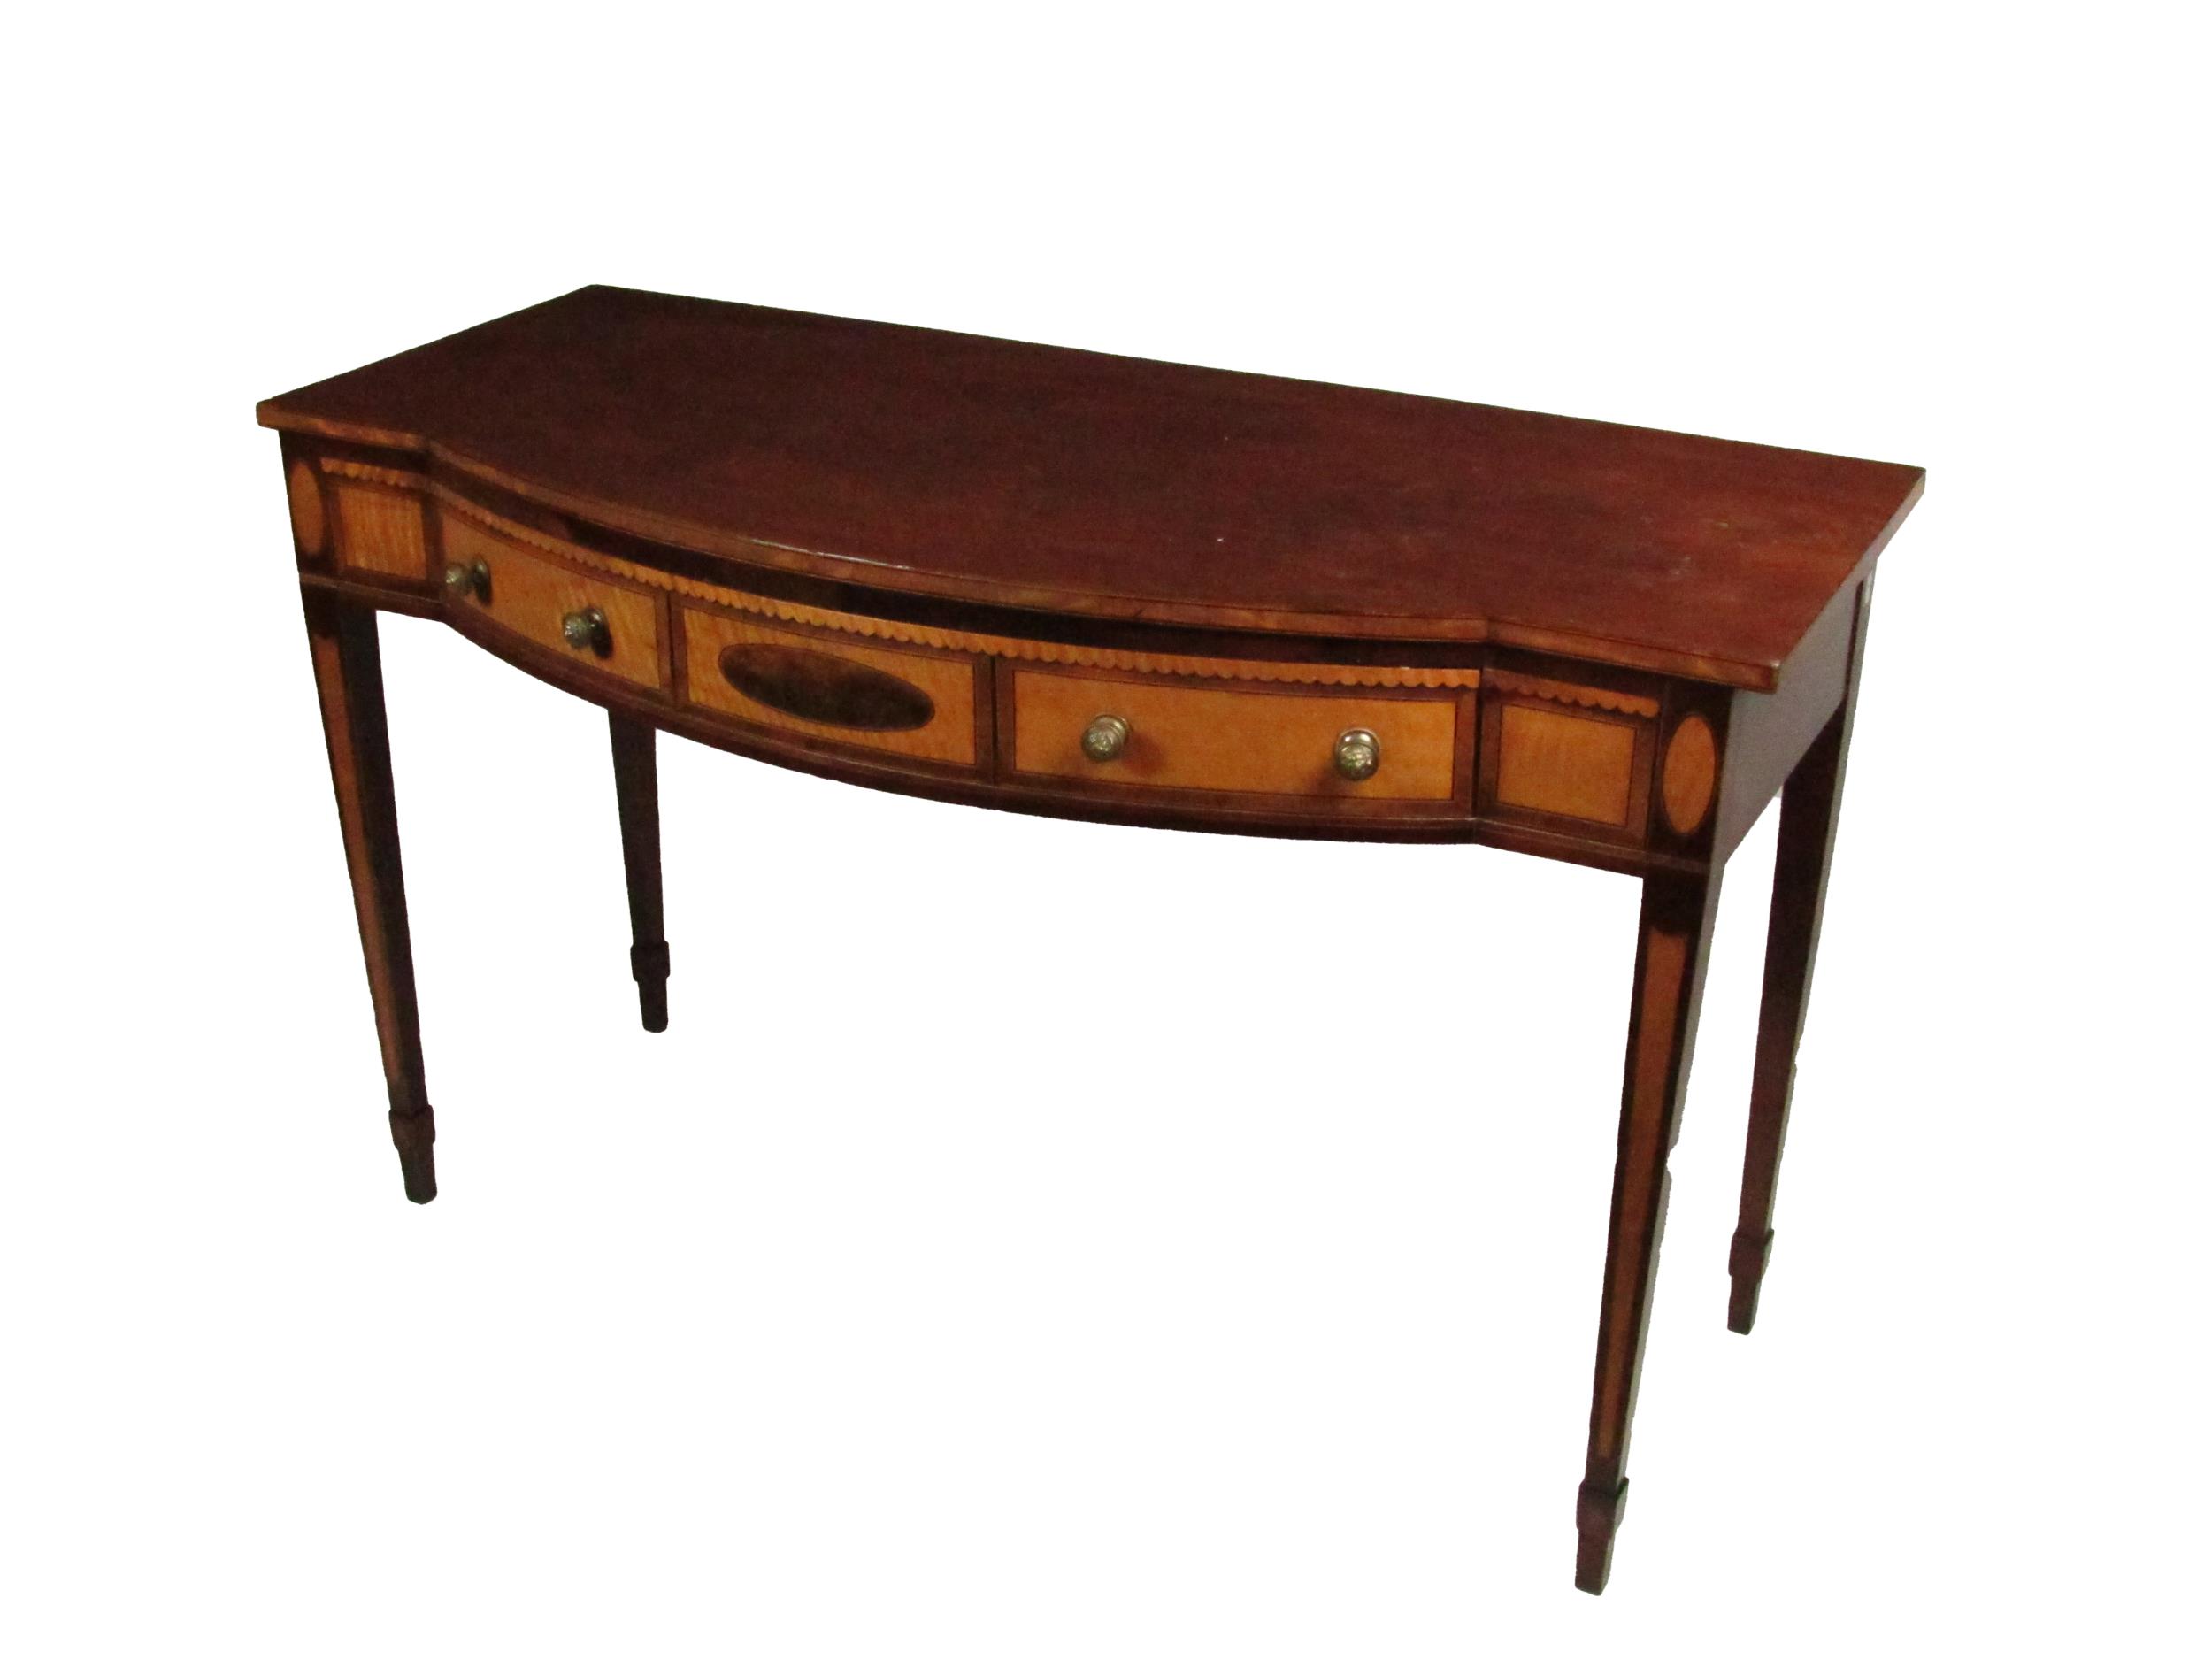 A fine quality Georgian period mahogany bow fronted Sideboard, of small proportions, the top with